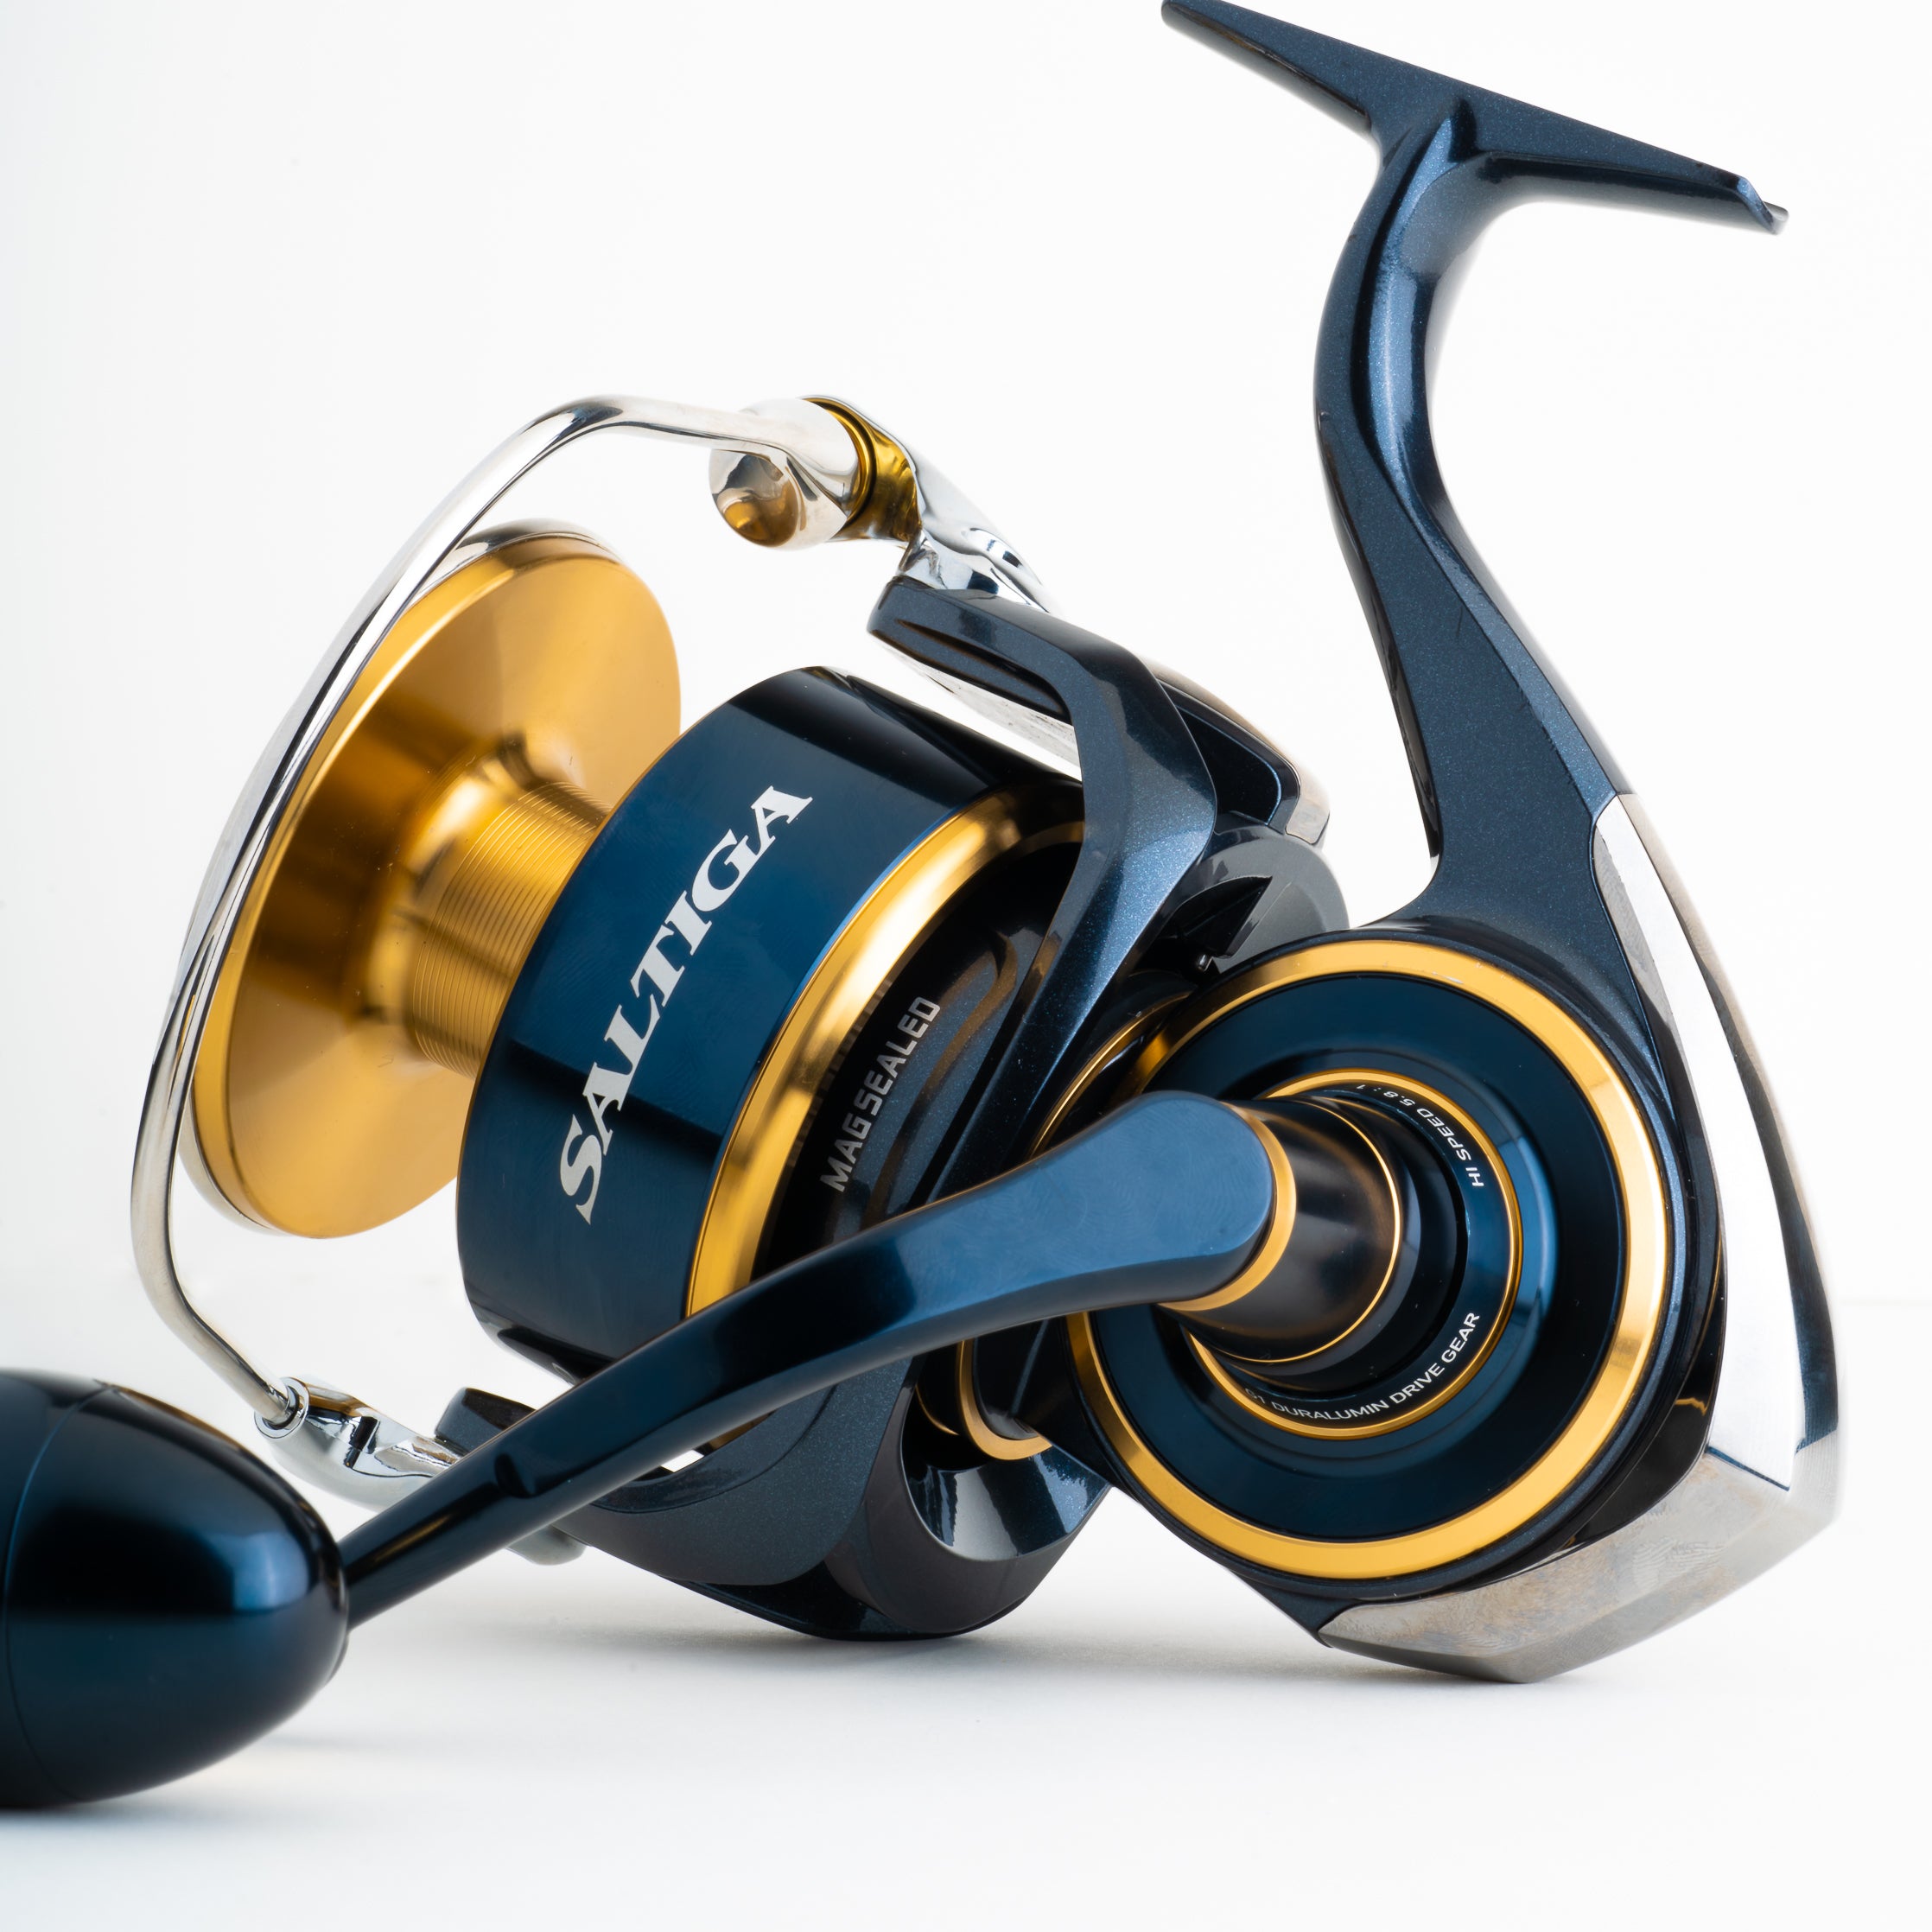 DAIWA SALTIGA 2020  THE LATEST FISHING REEL AVAILABLE AT TACKLE WEST 